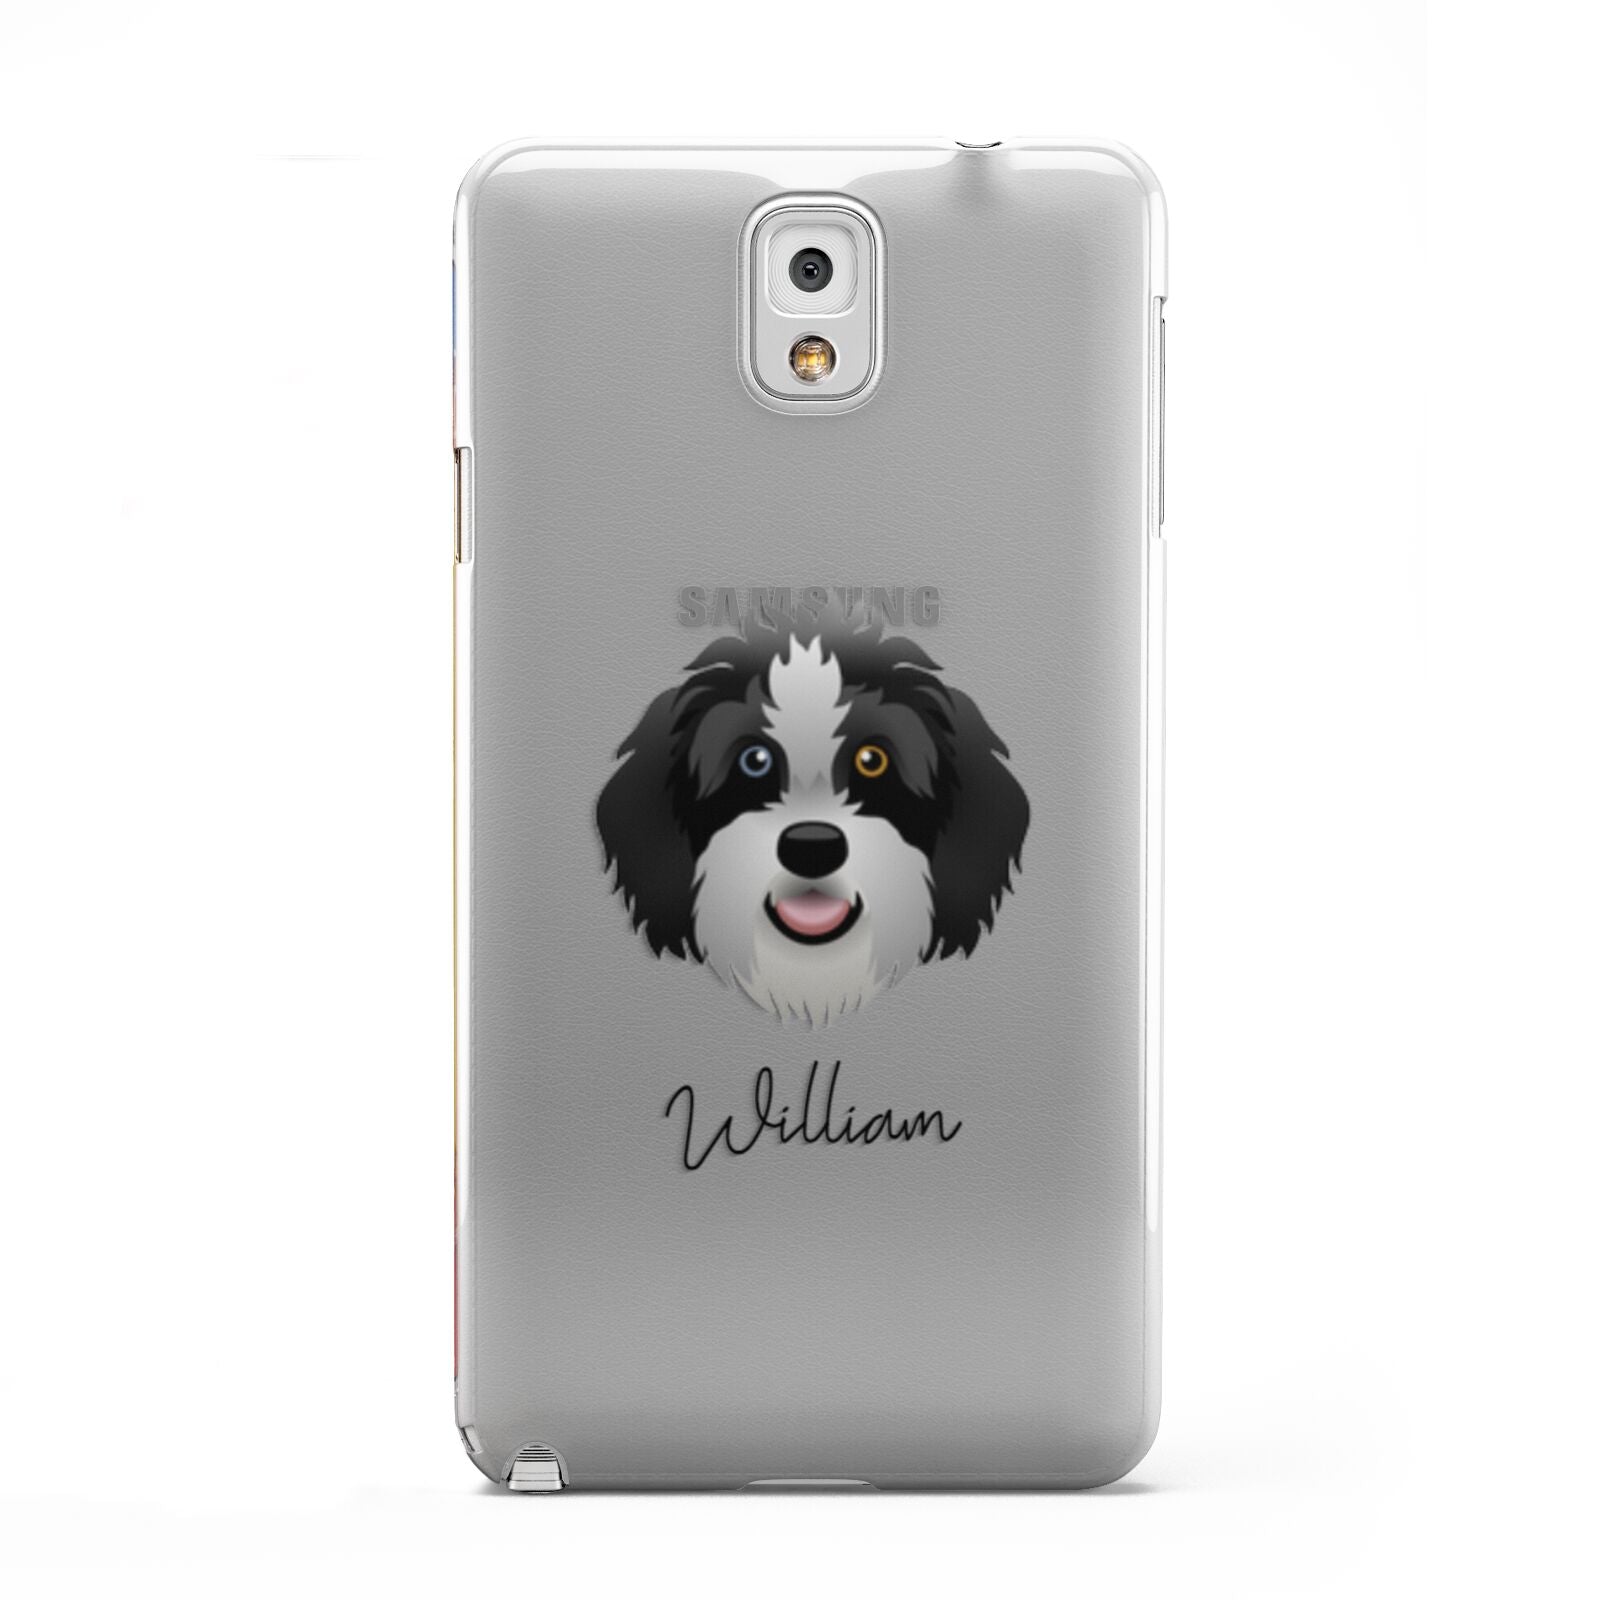 Aussiedoodle Personalised Samsung Galaxy Note 3 Case